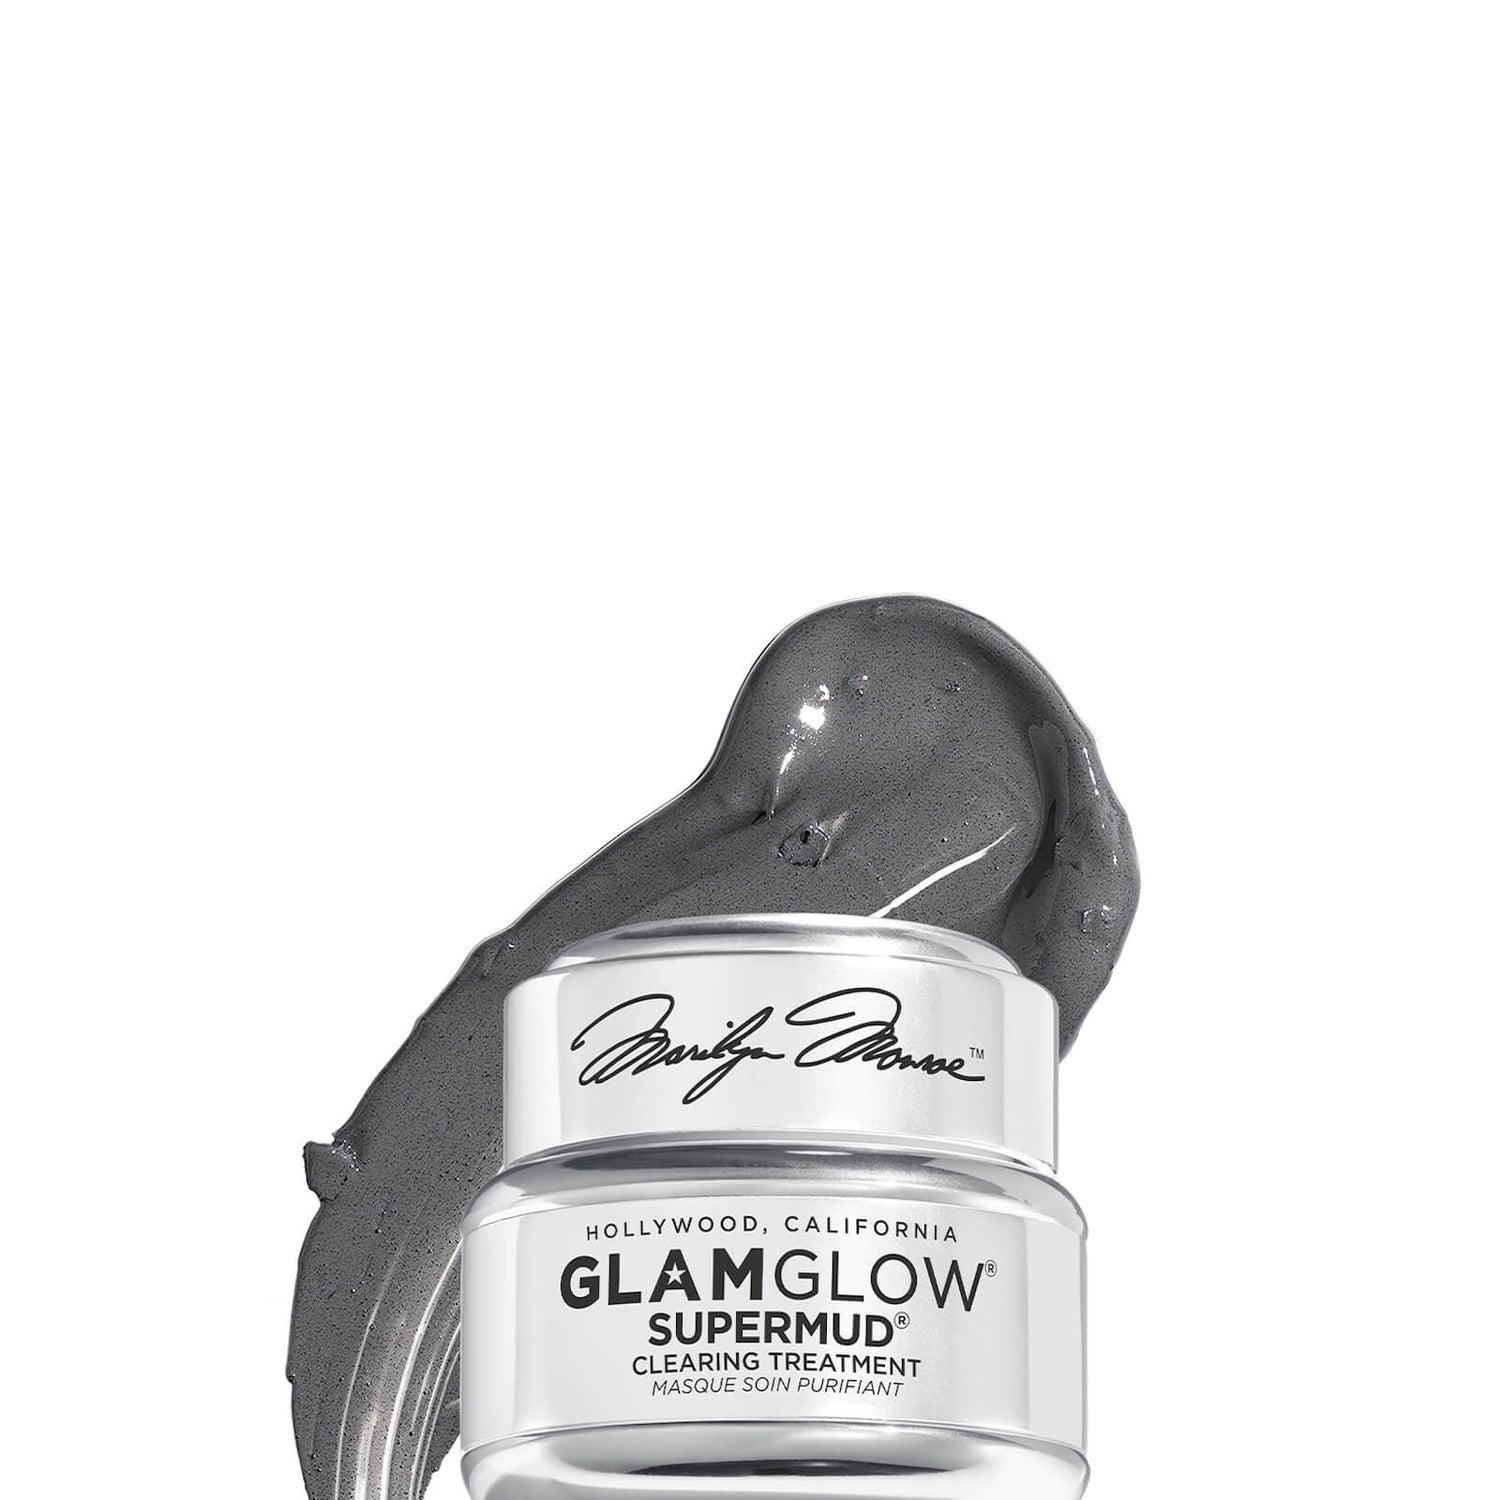 GLAMGLOW Marilyn Monglow Supermud Mask 15g